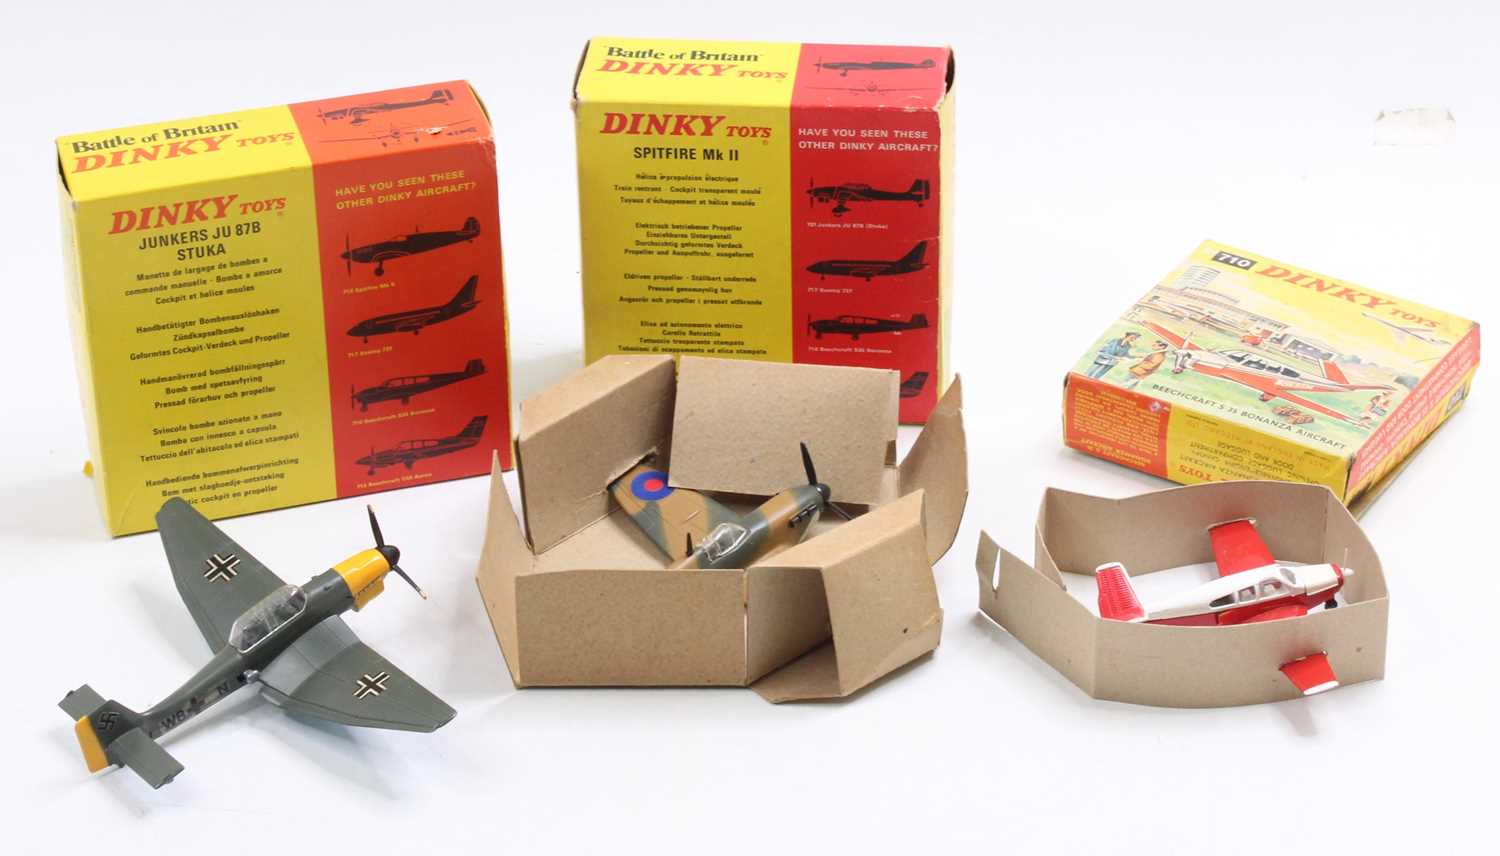 Dinky Toys boxed aircraft from the film "The Battle of Britain" comprising No. 719 Spitfire Mk.II in - Image 2 of 2